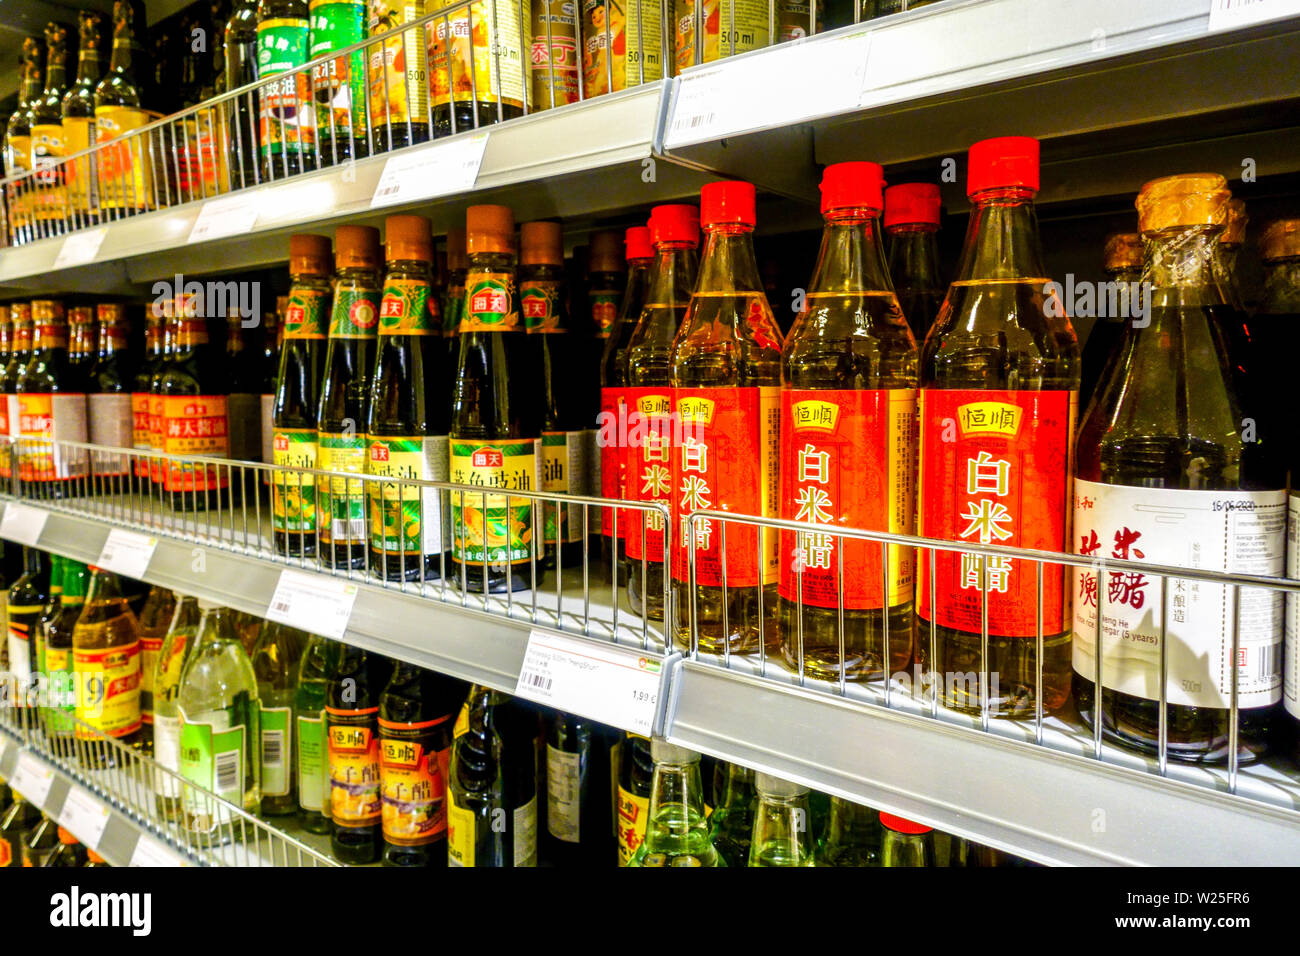 Only Asian products in the supermarket Sauces, Soy Sauce, Dresden, Germany Supermarket shelves, shelf Stock Photo